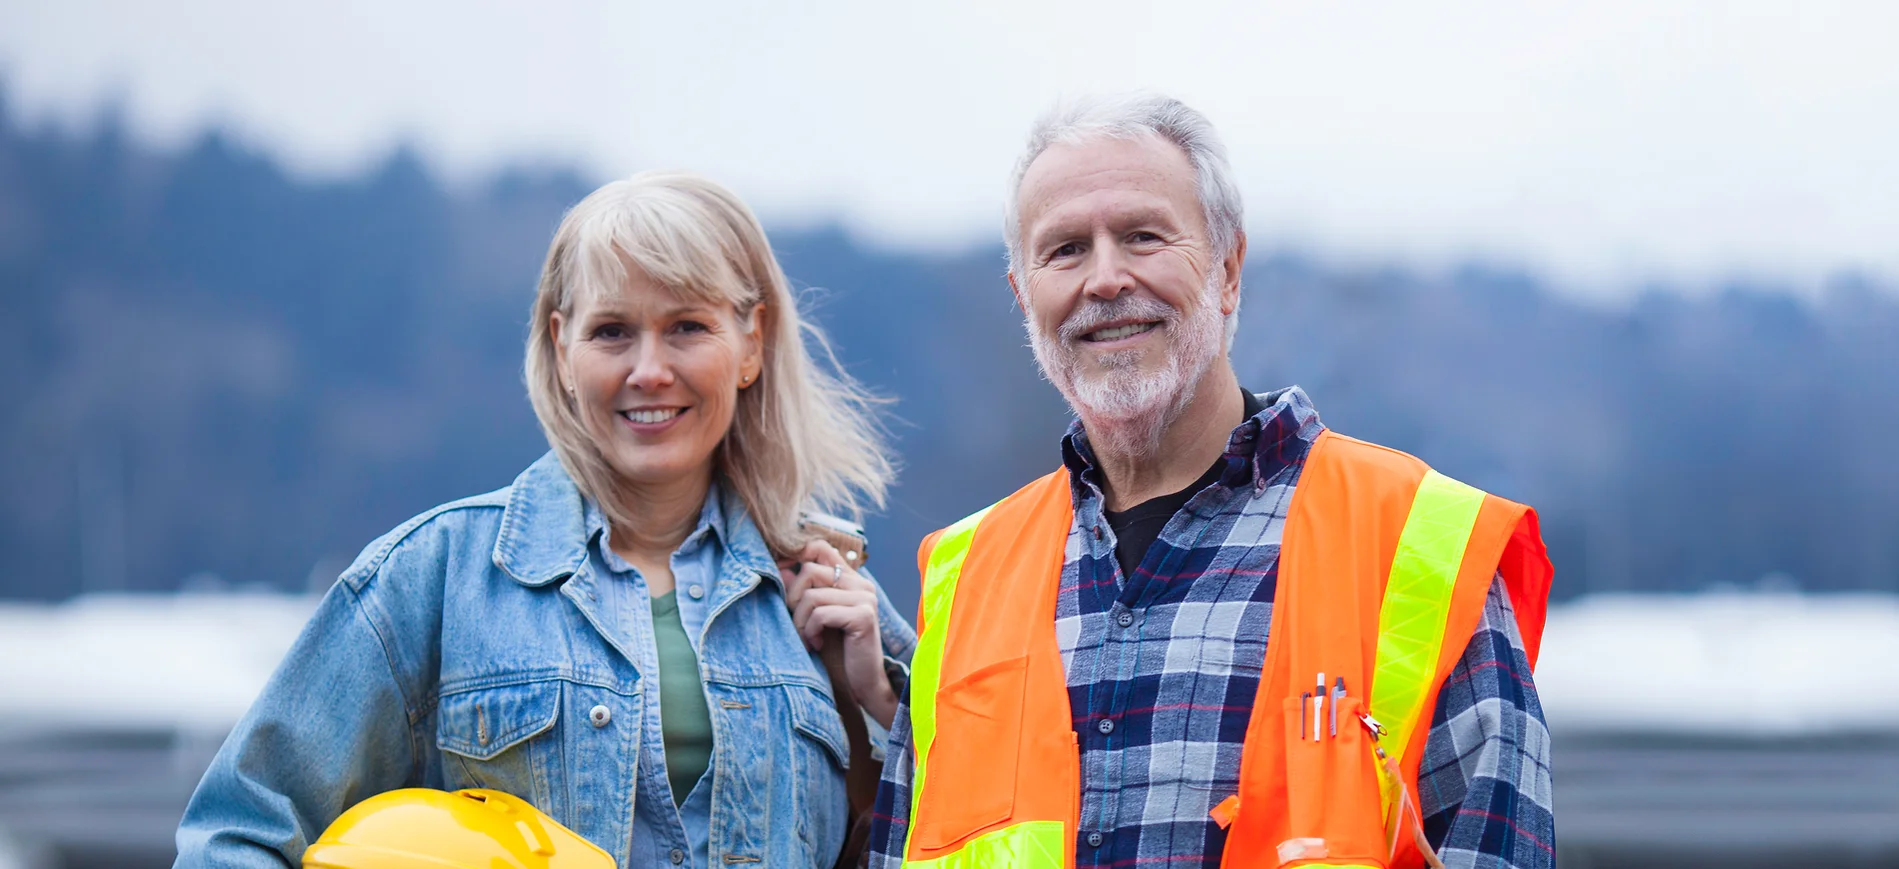 a man and woman in safety vests